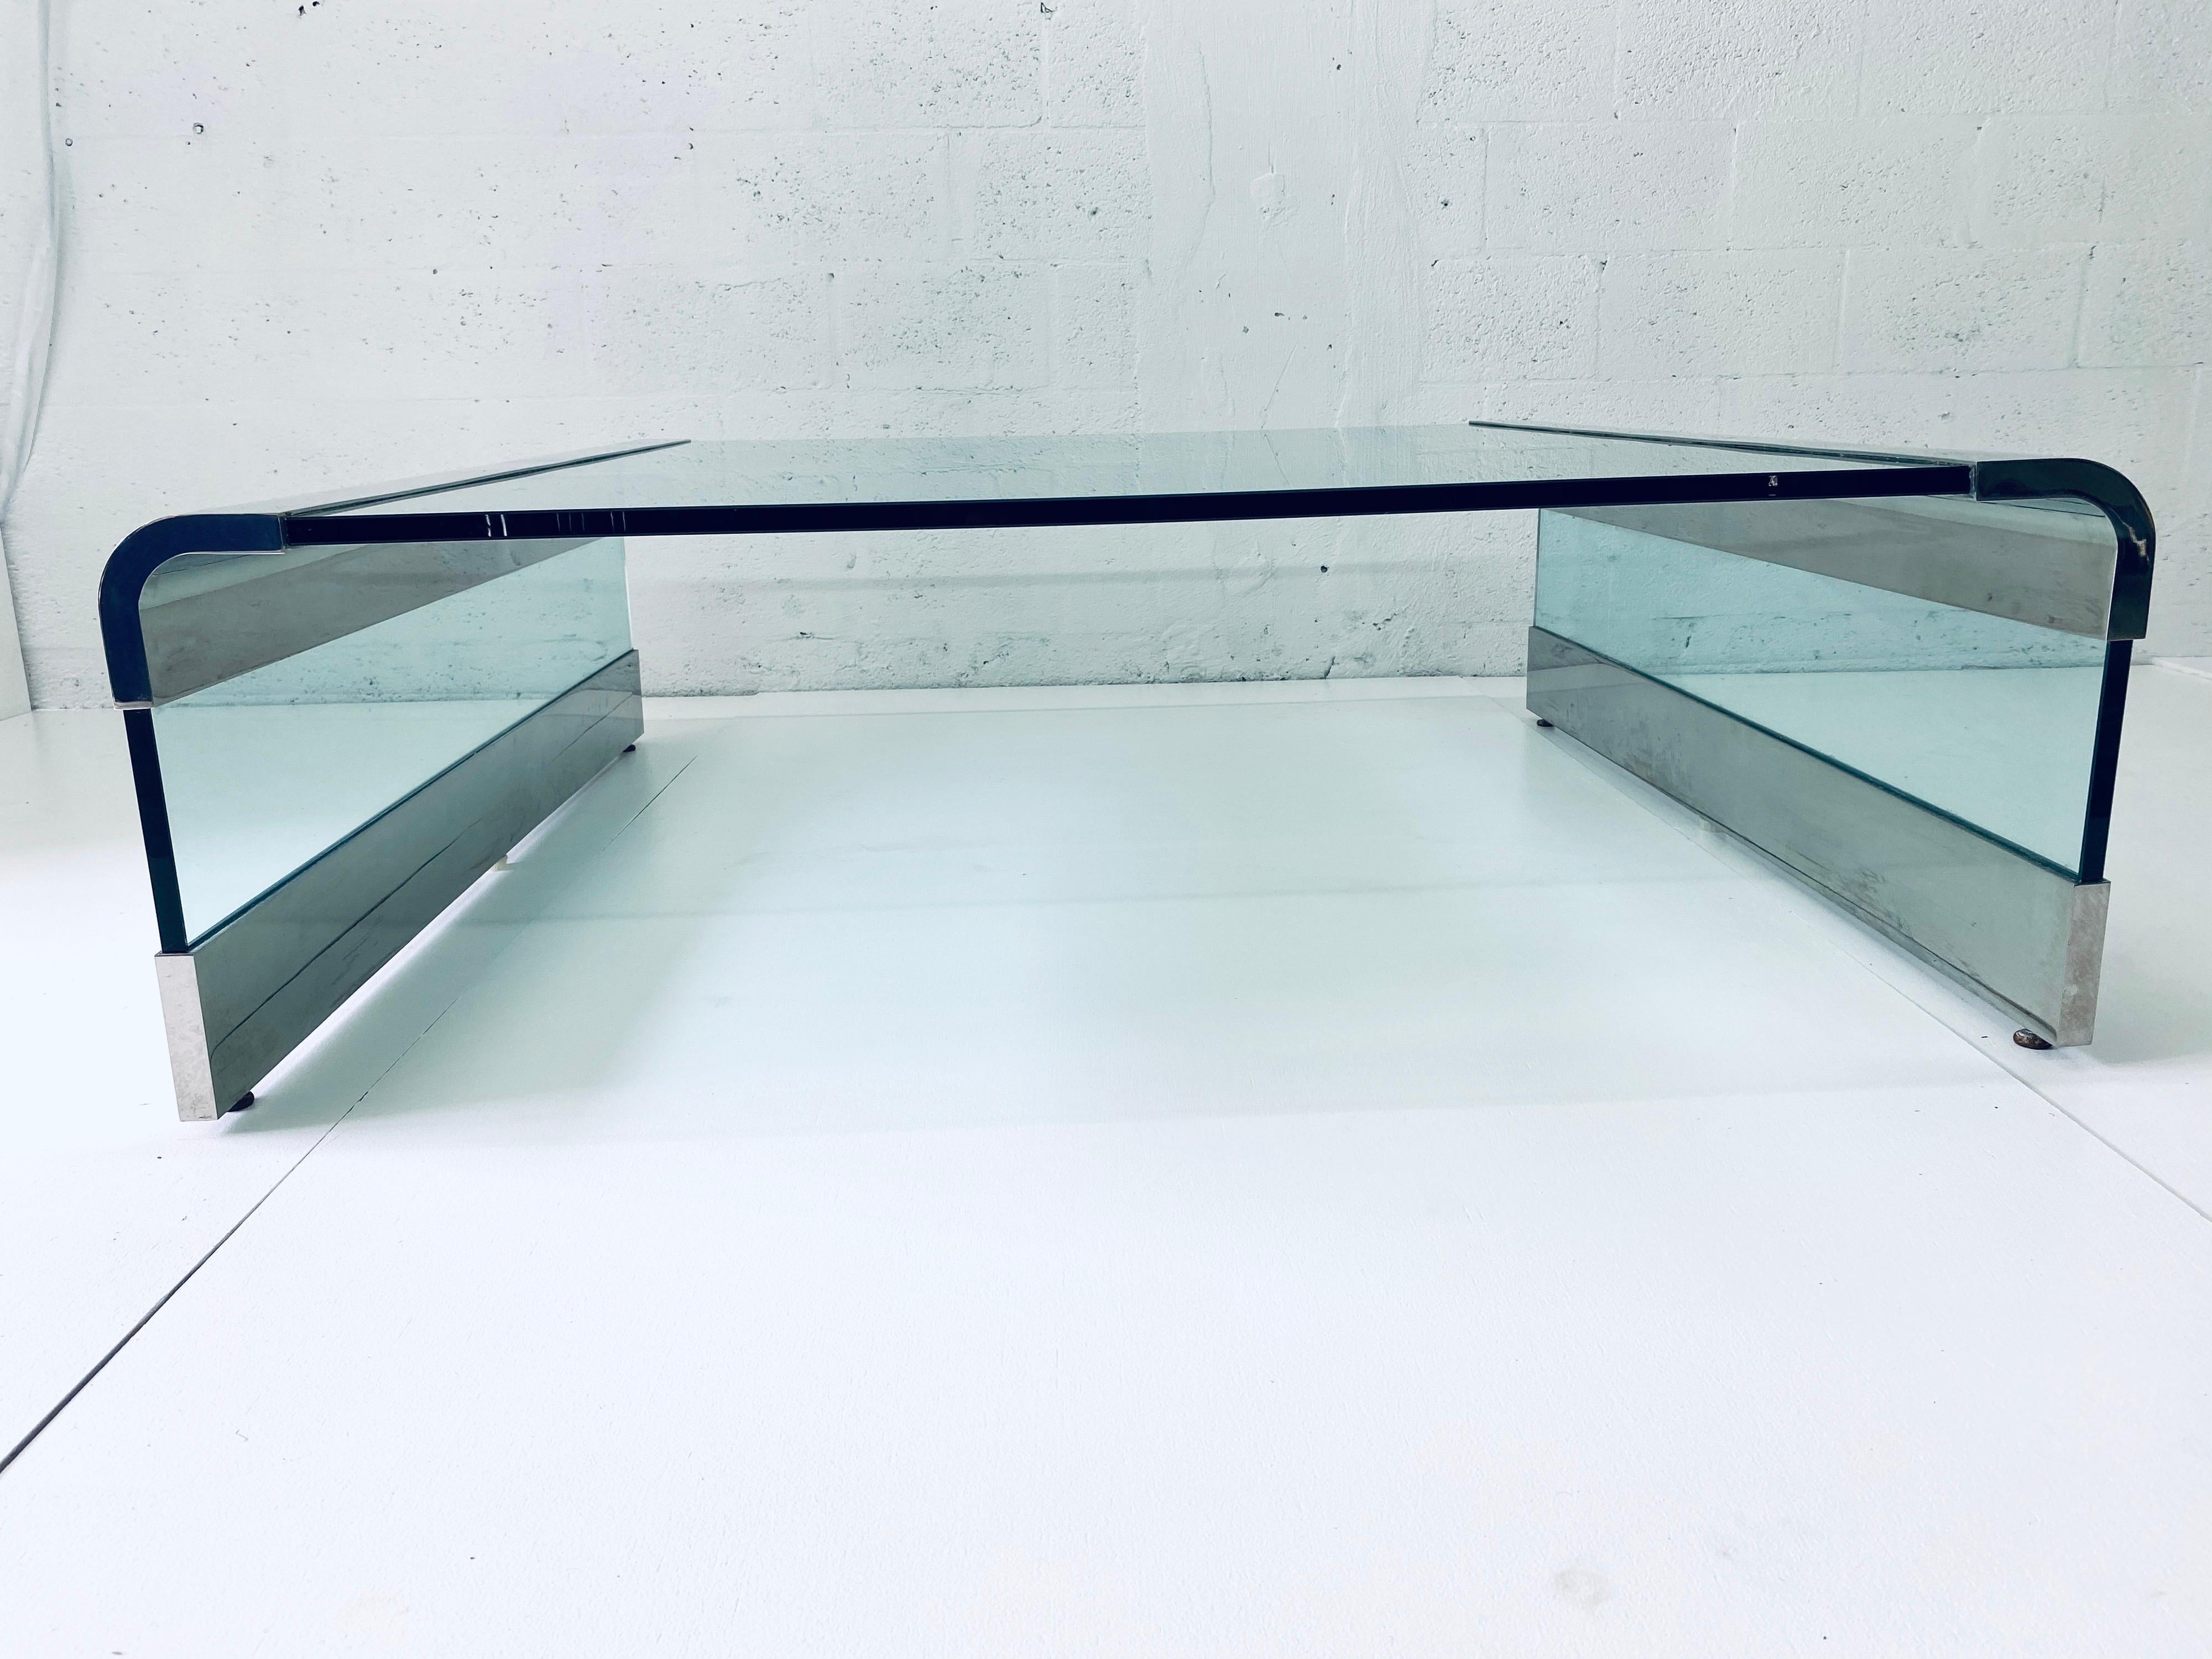 Original Leon Rosen for Pace collection waterfall glass and polished chrome coffee table from the 1970s.